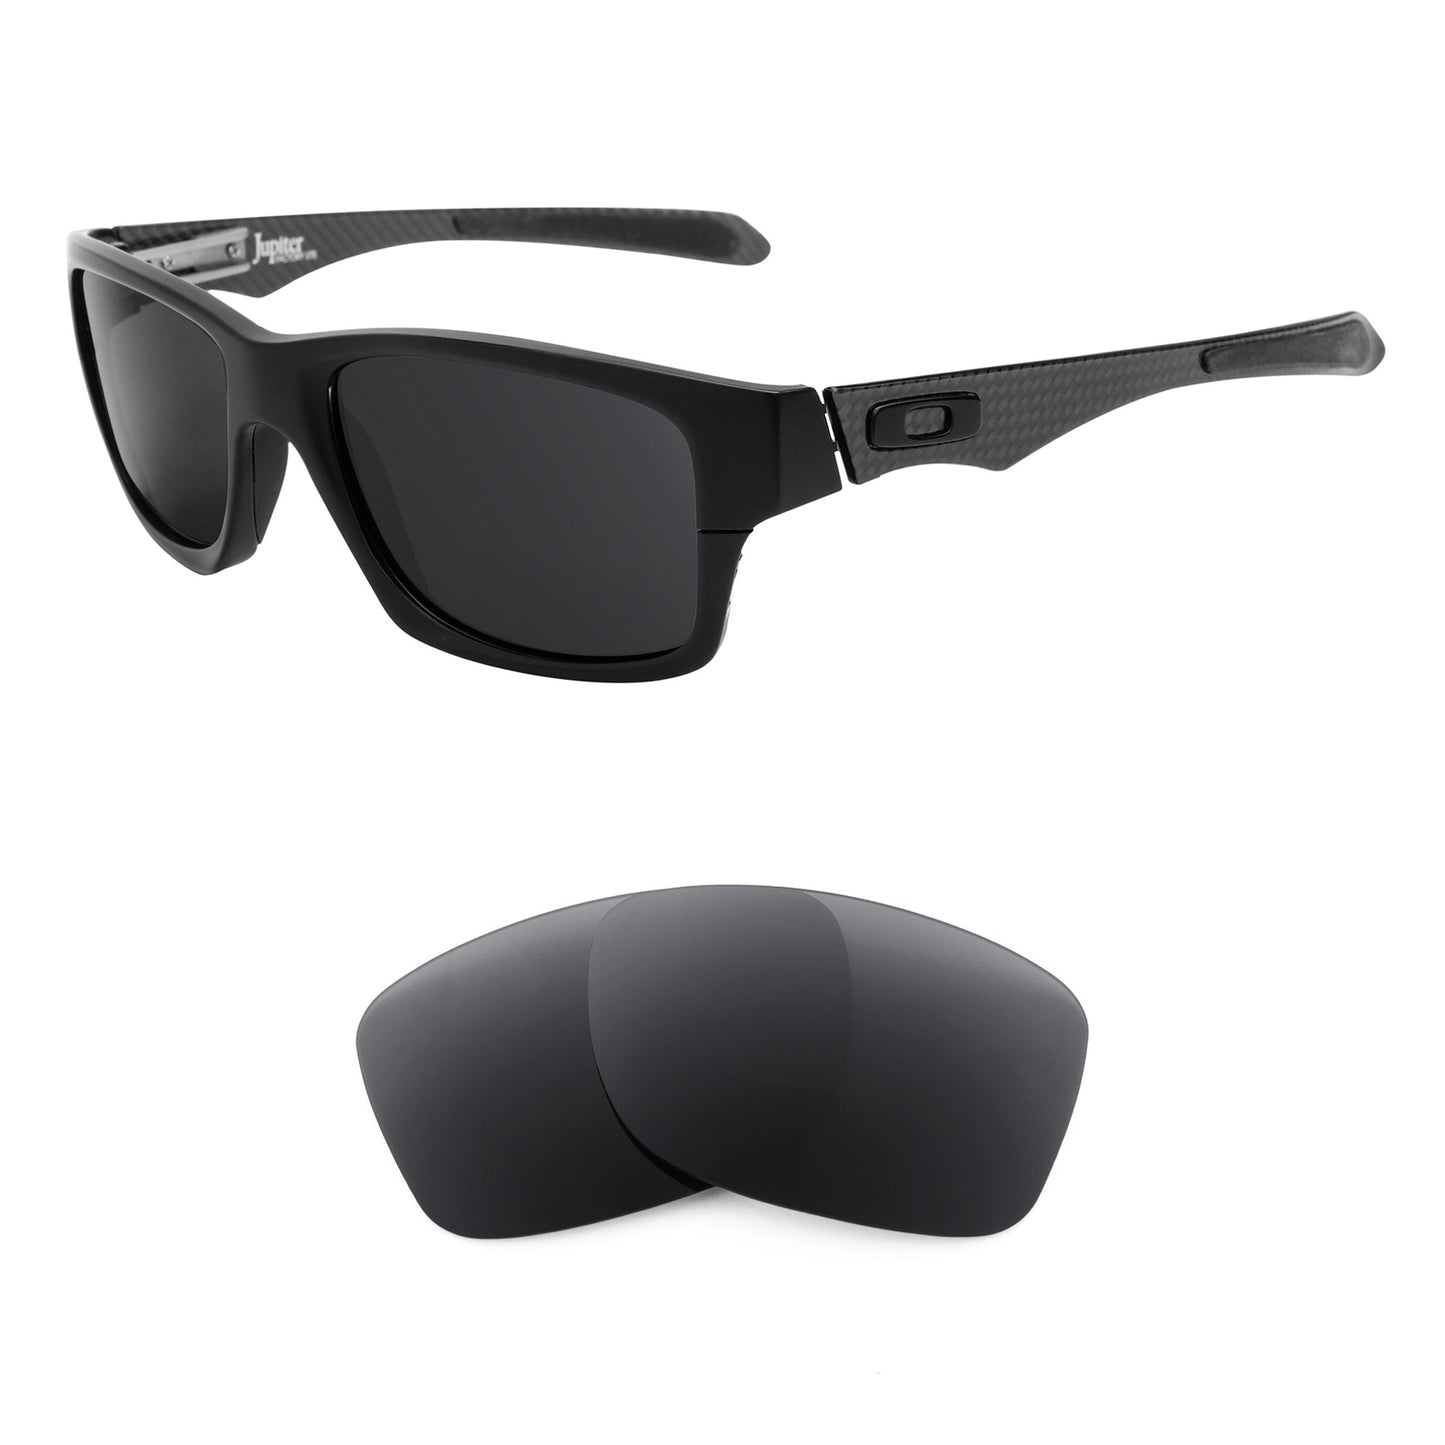 Oakley Jupiter Factory Lite sunglasses with replacement lenses